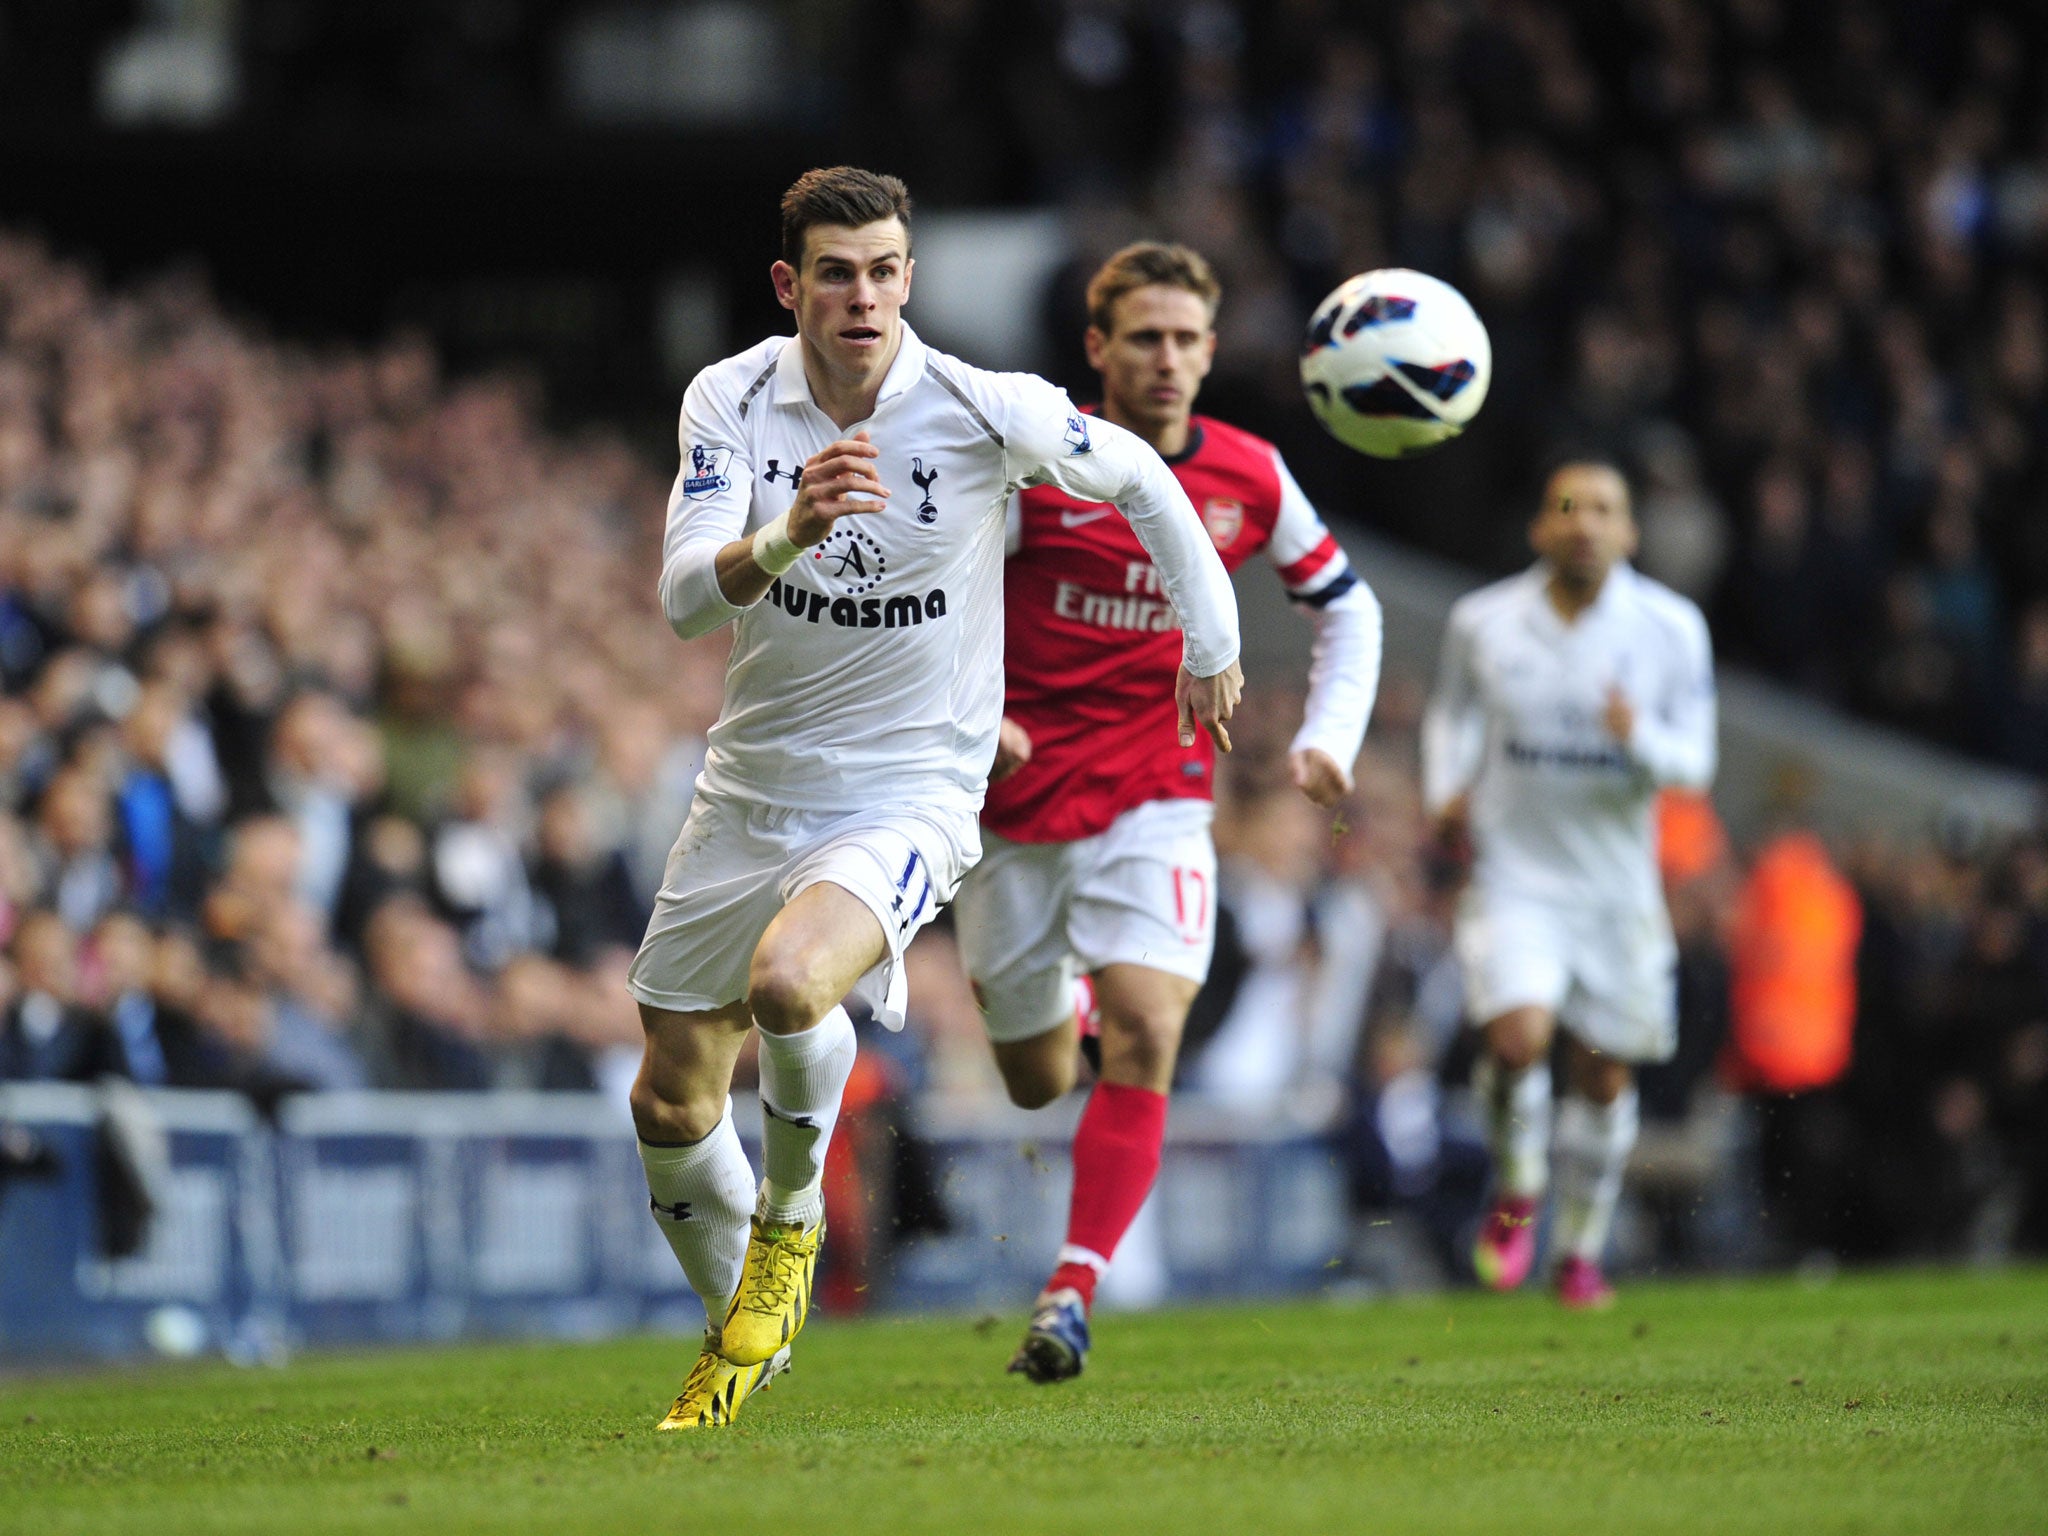 Tottenham Hotspur's Welsh midfielder Gareth Bale (L) chases the ball at the 3 March game